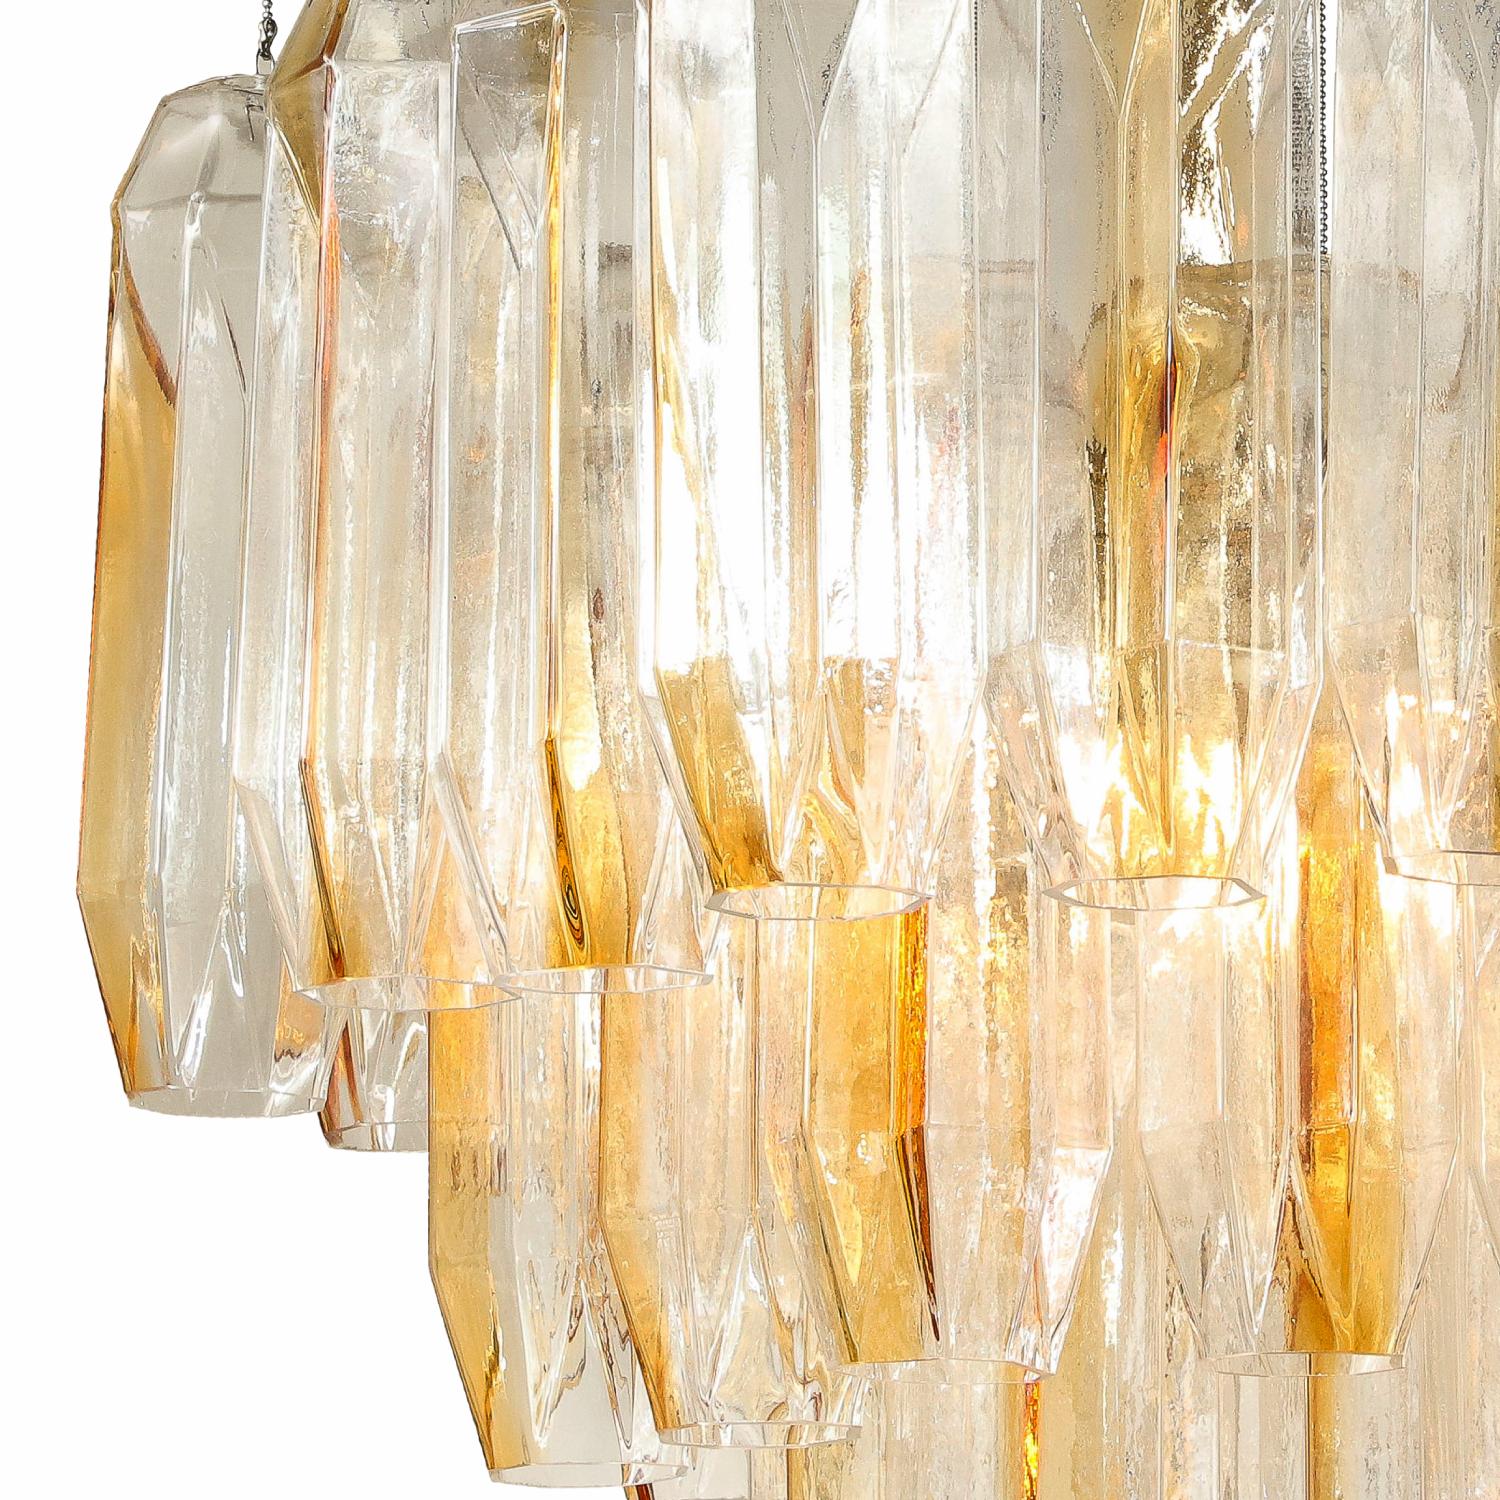 Remarkable clear and amber shaped glass chandelier with a polished nickel hexagon shape canopy. It was designed by Kalmar Franken, Austria 1960s. The glass pieces were likely made by AV Mazzega in Murano as Kalmar used many Murano glass pieces for